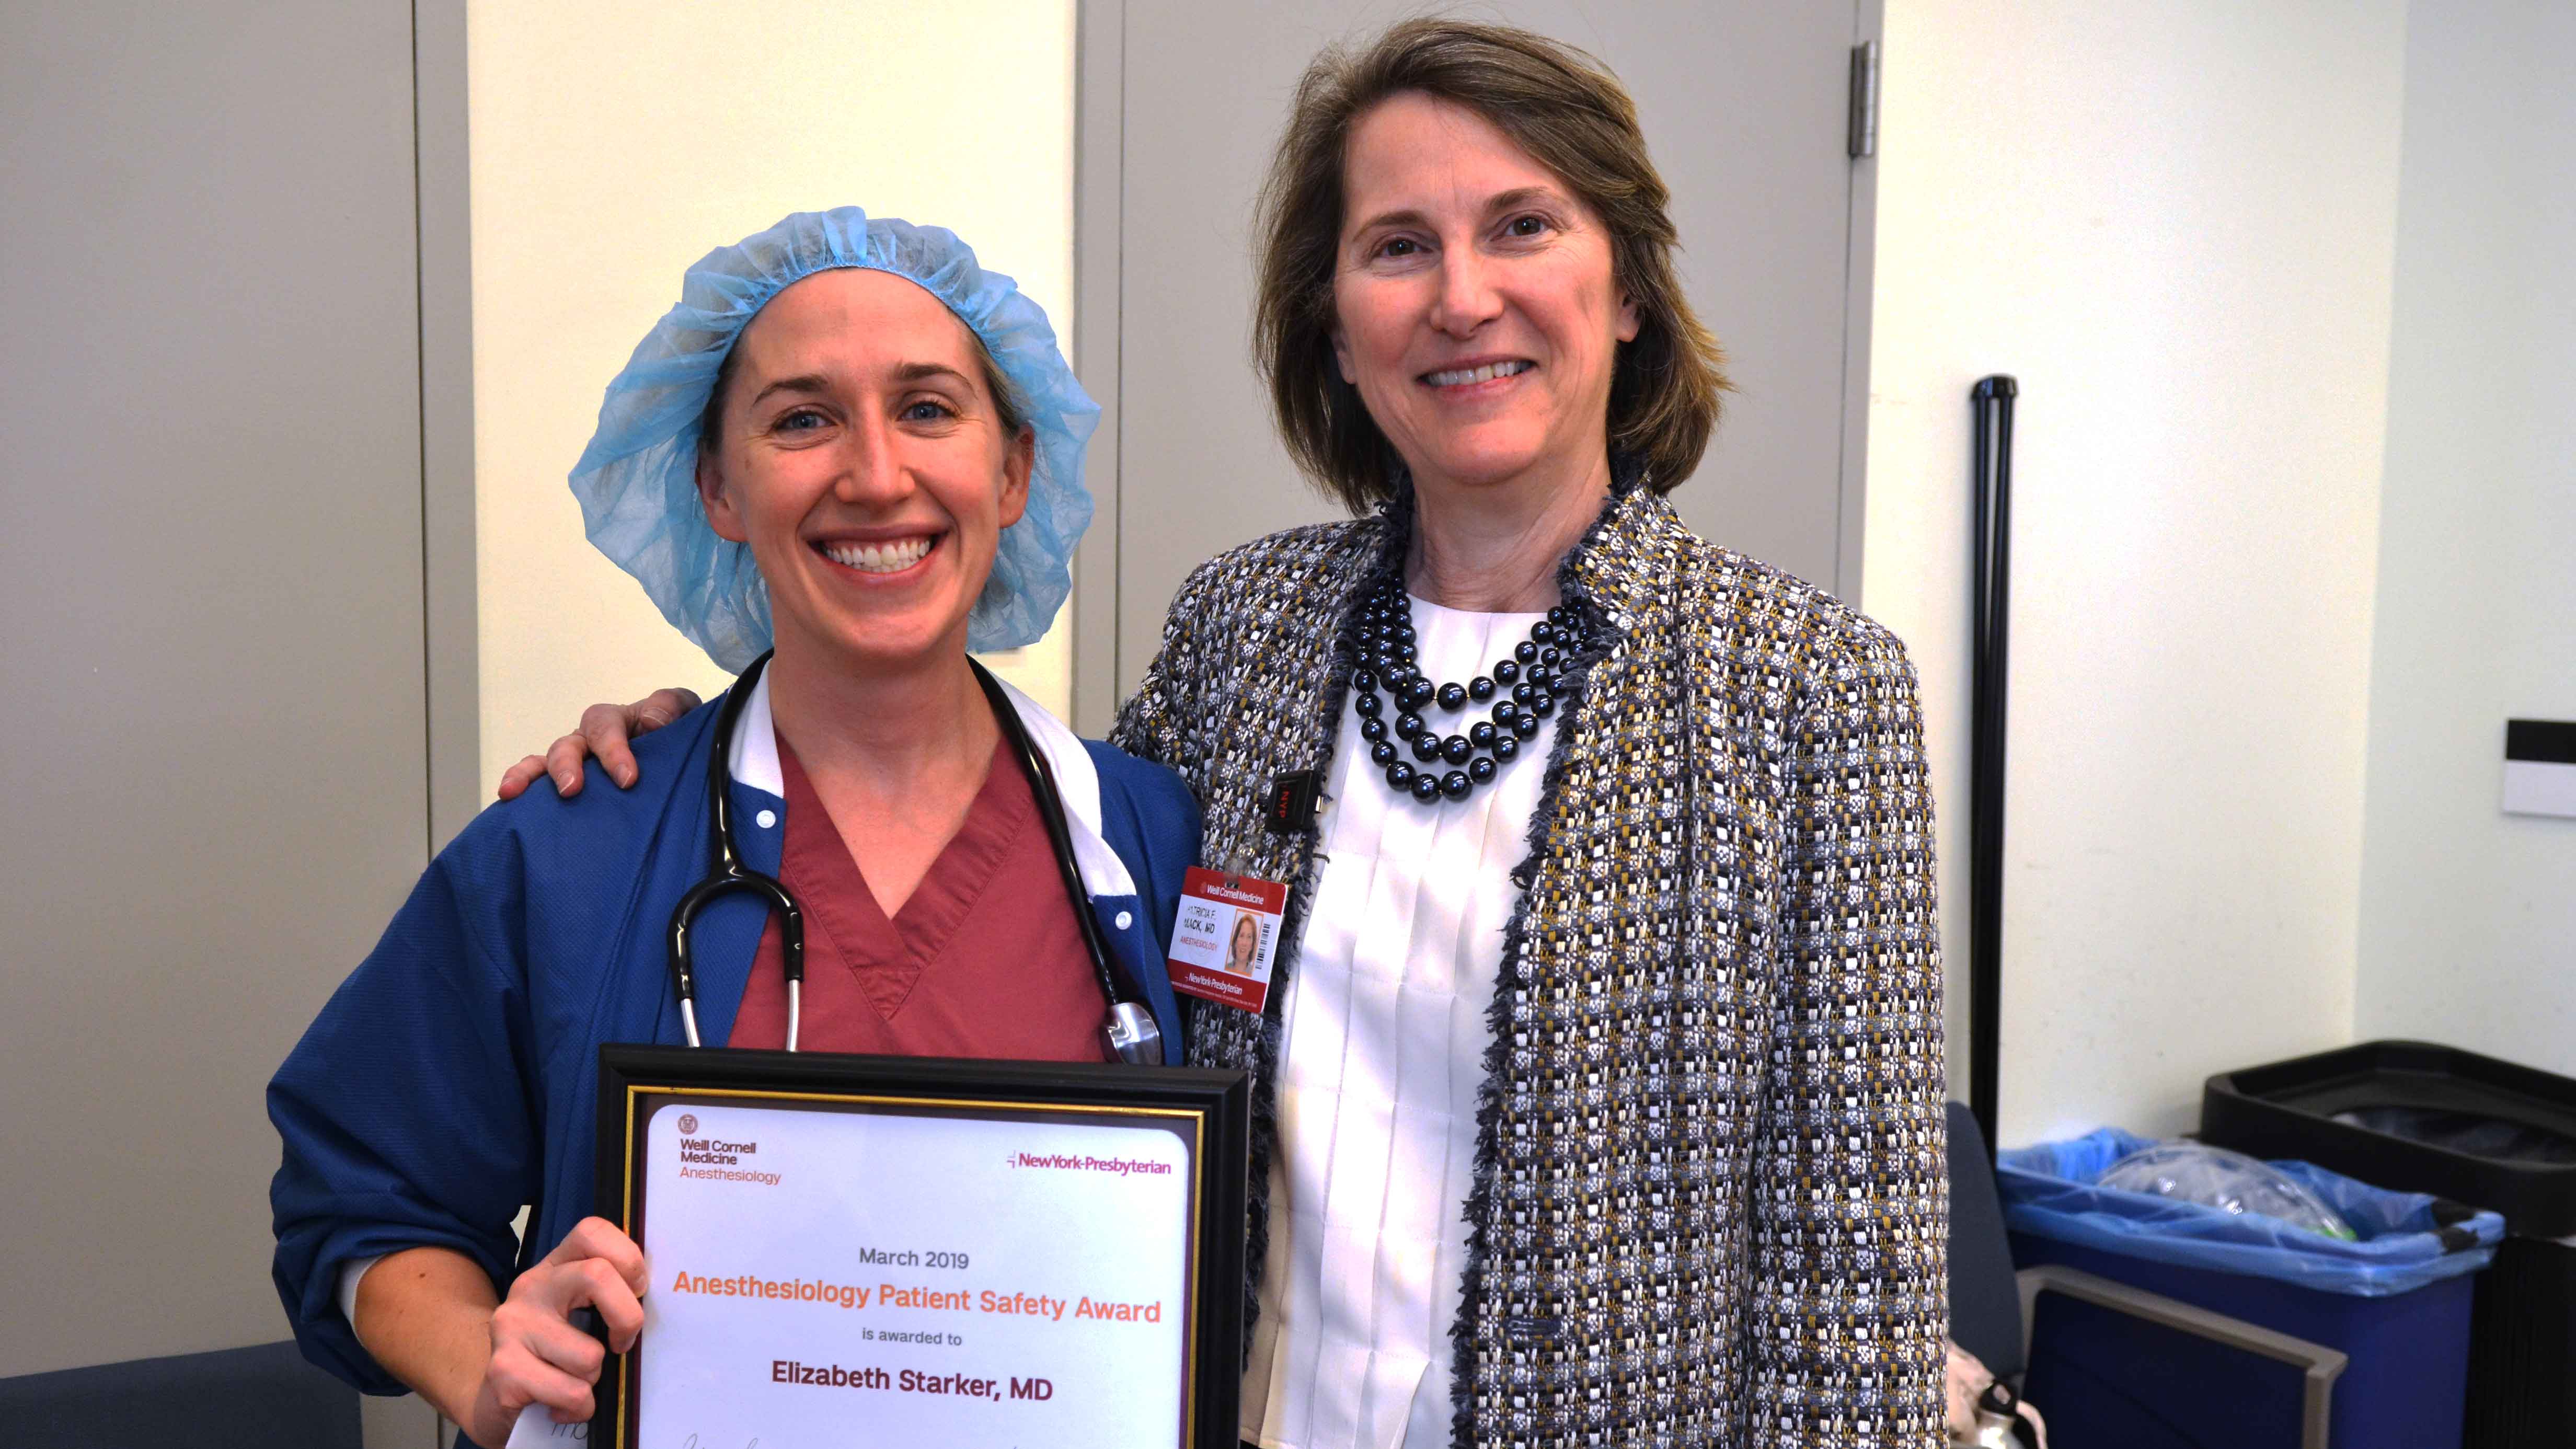 From left, Dr. Beth Starker receives the Anesthesiology Patient Safety Award from Dr. Patricia Fogarty Mack